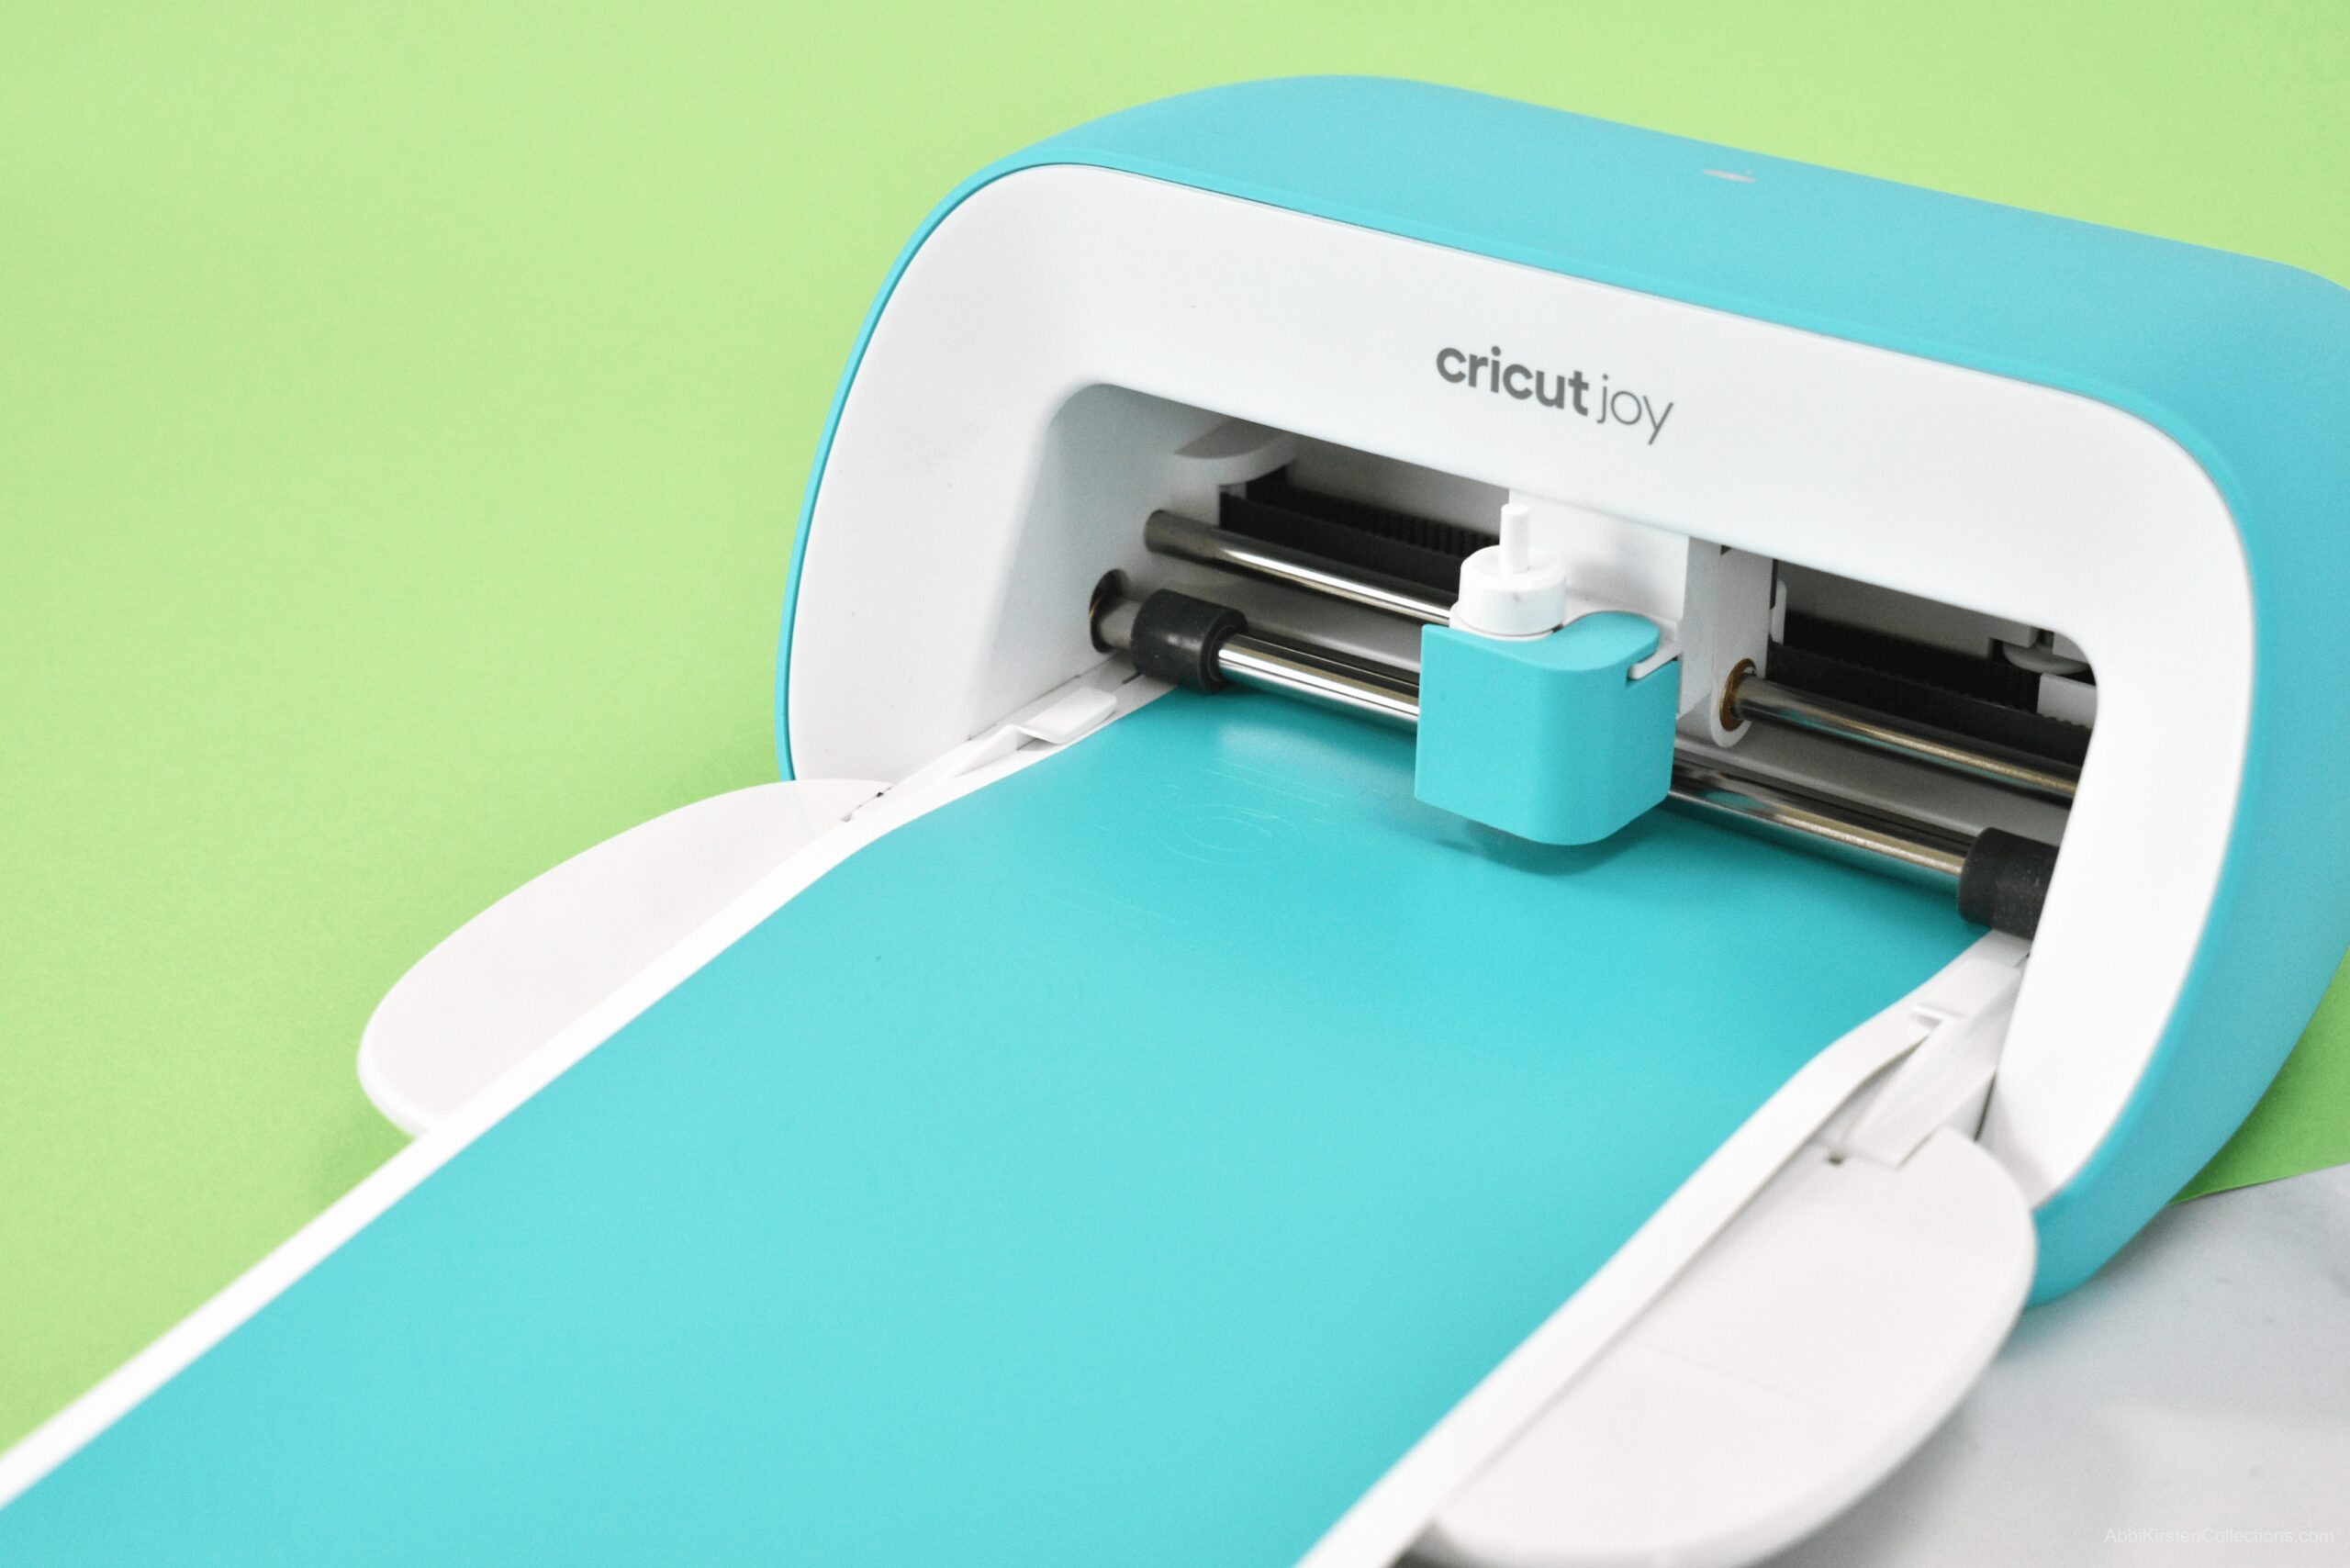 12 Cricut Joy Accessories and Materials You Need